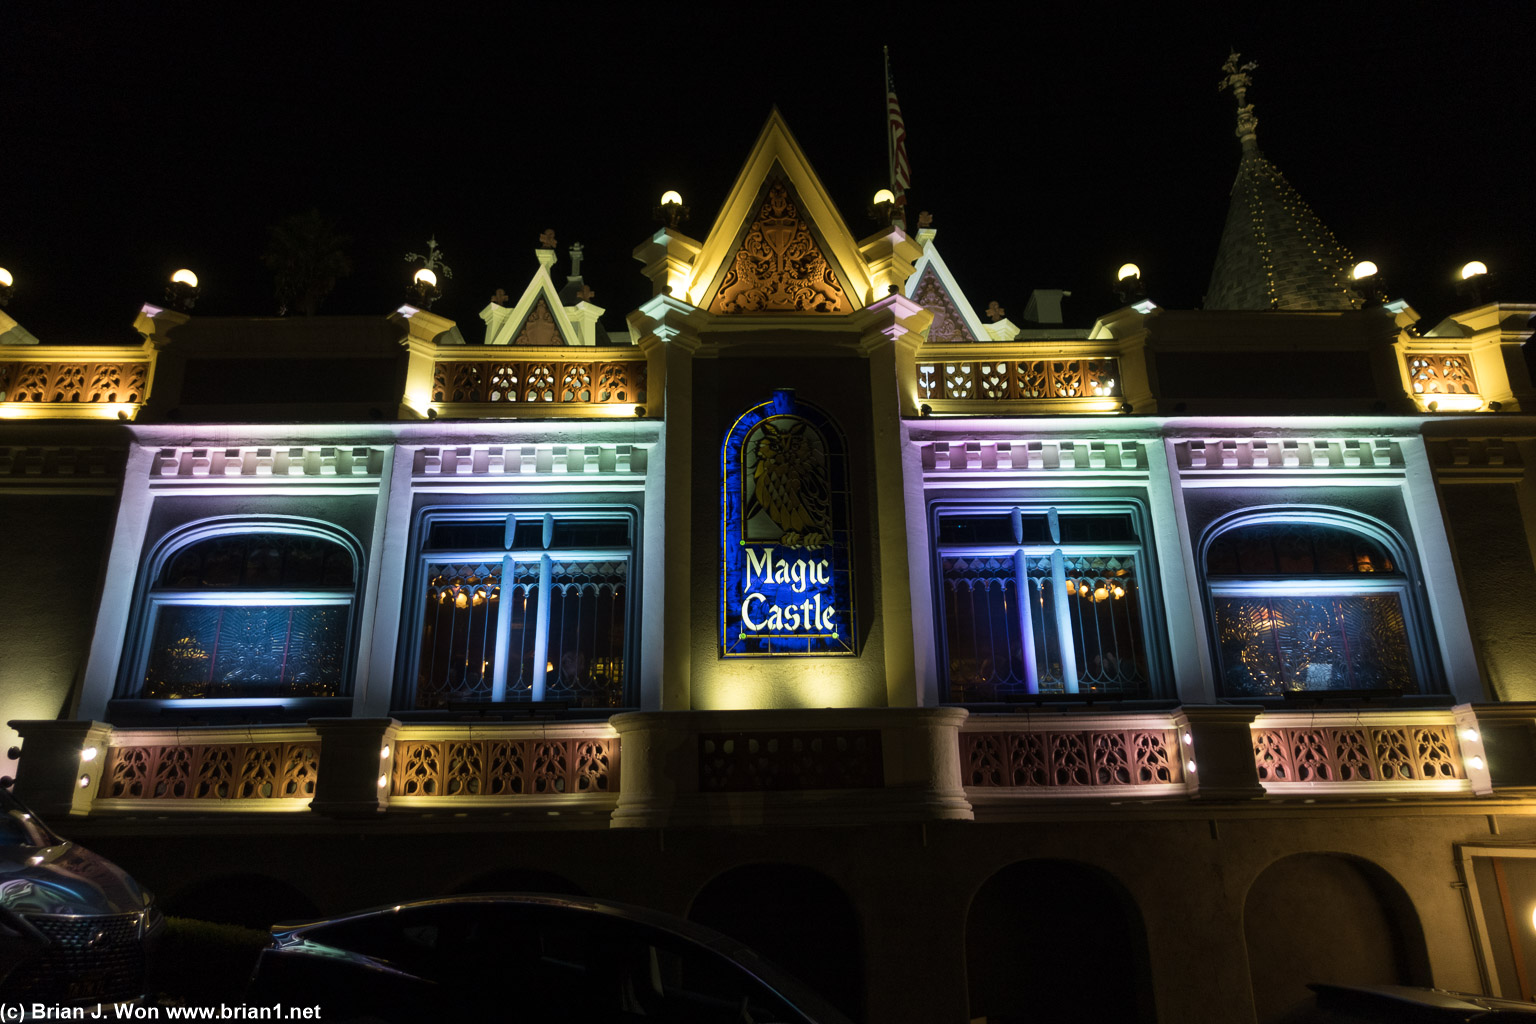 Magic Castle lit up for their 60th anniversary.